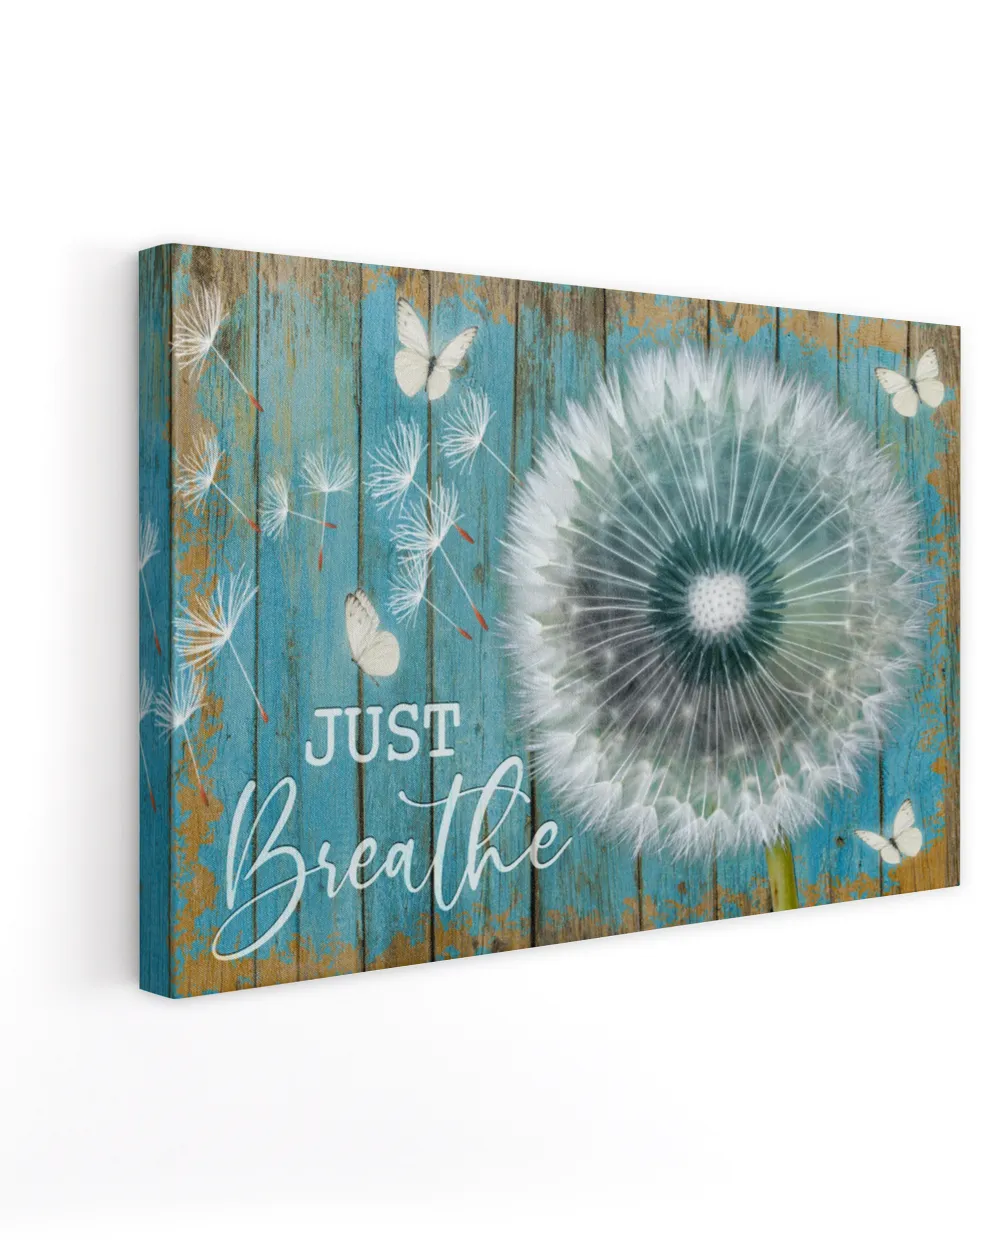 Just Breathe | Butterfly Canvas, Dandelion Canvas, Gift For Family, Gift For Friend, Flower Canvas, An Inspirational Present For Your Loved, Motivational Quote.